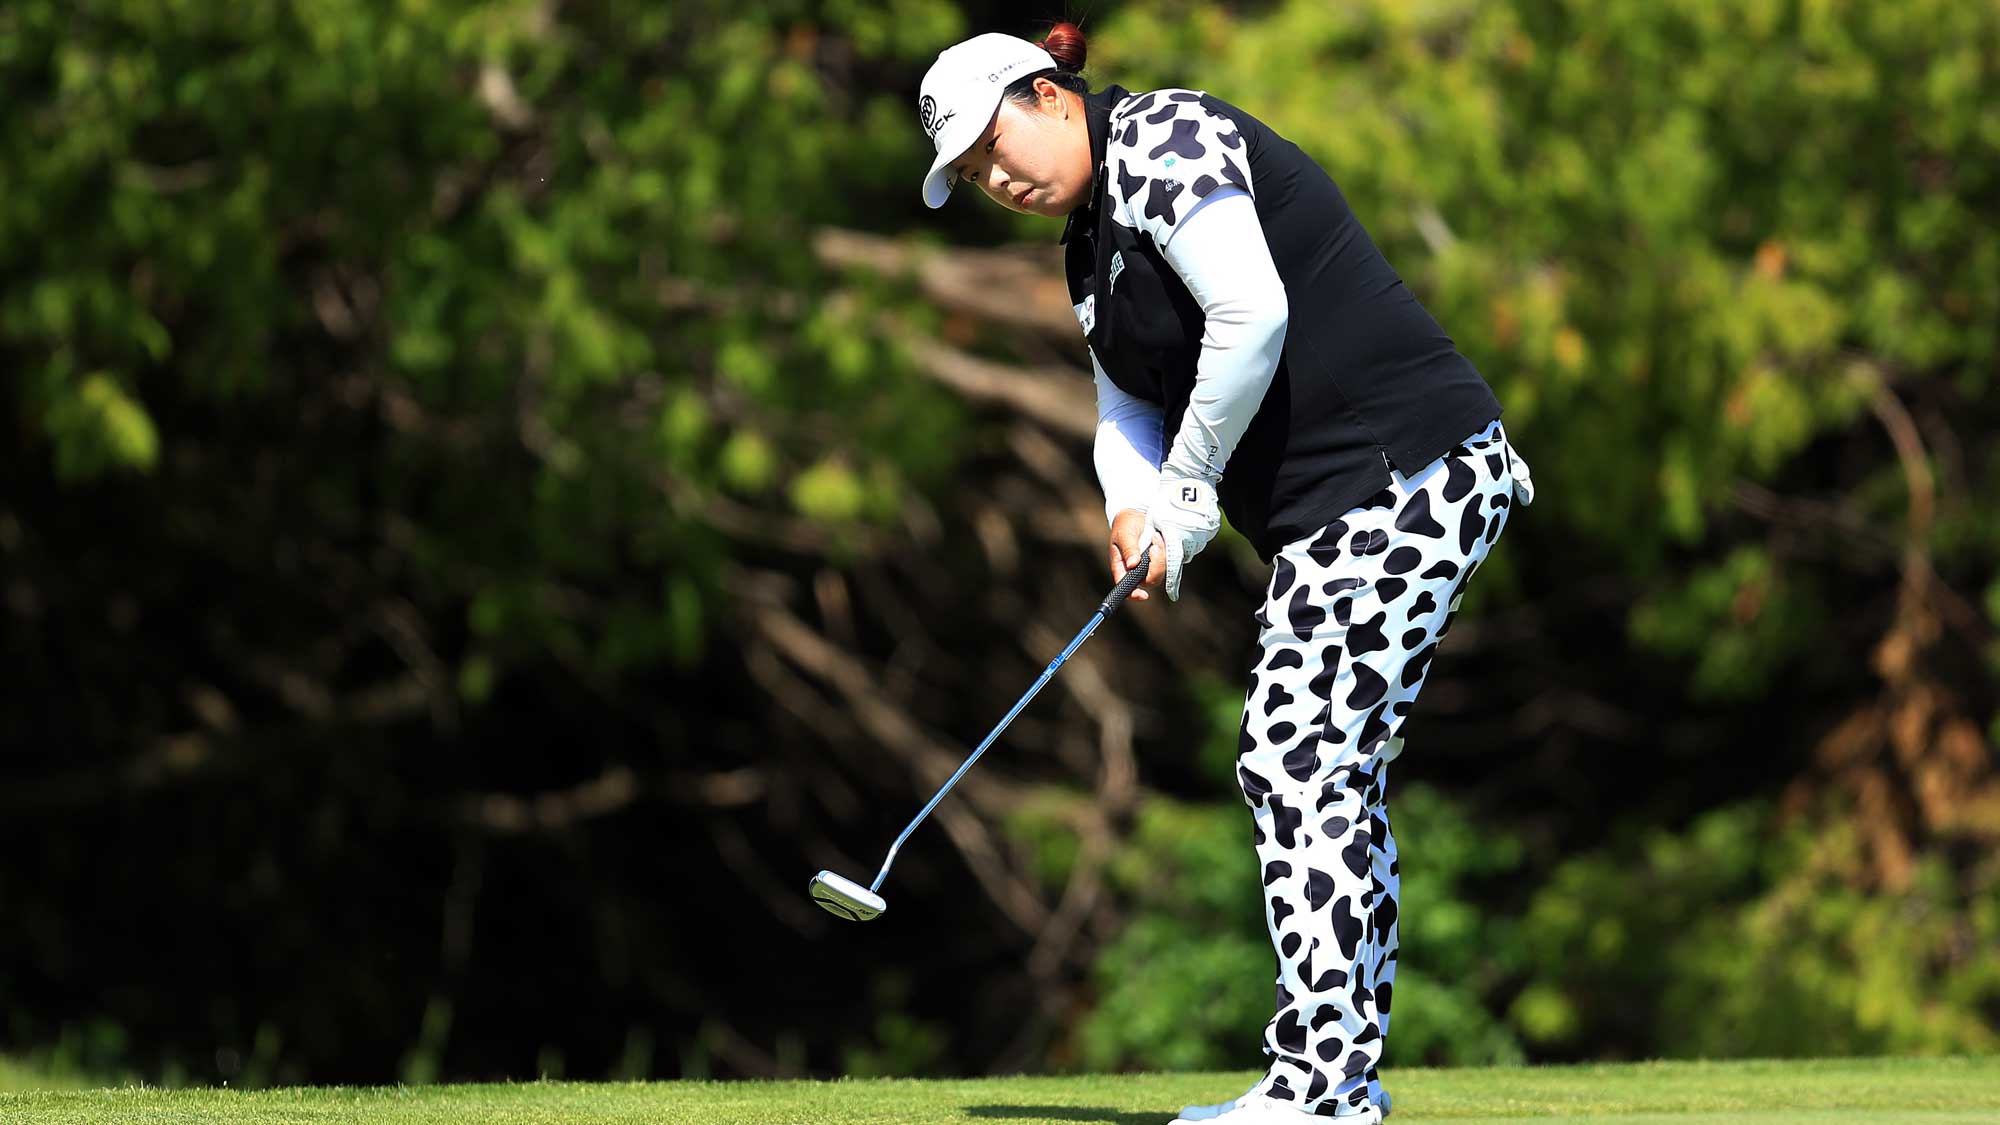 Shanshan Feng of China putts on the 17th hole during the first round of the Manulife LPGA Classic